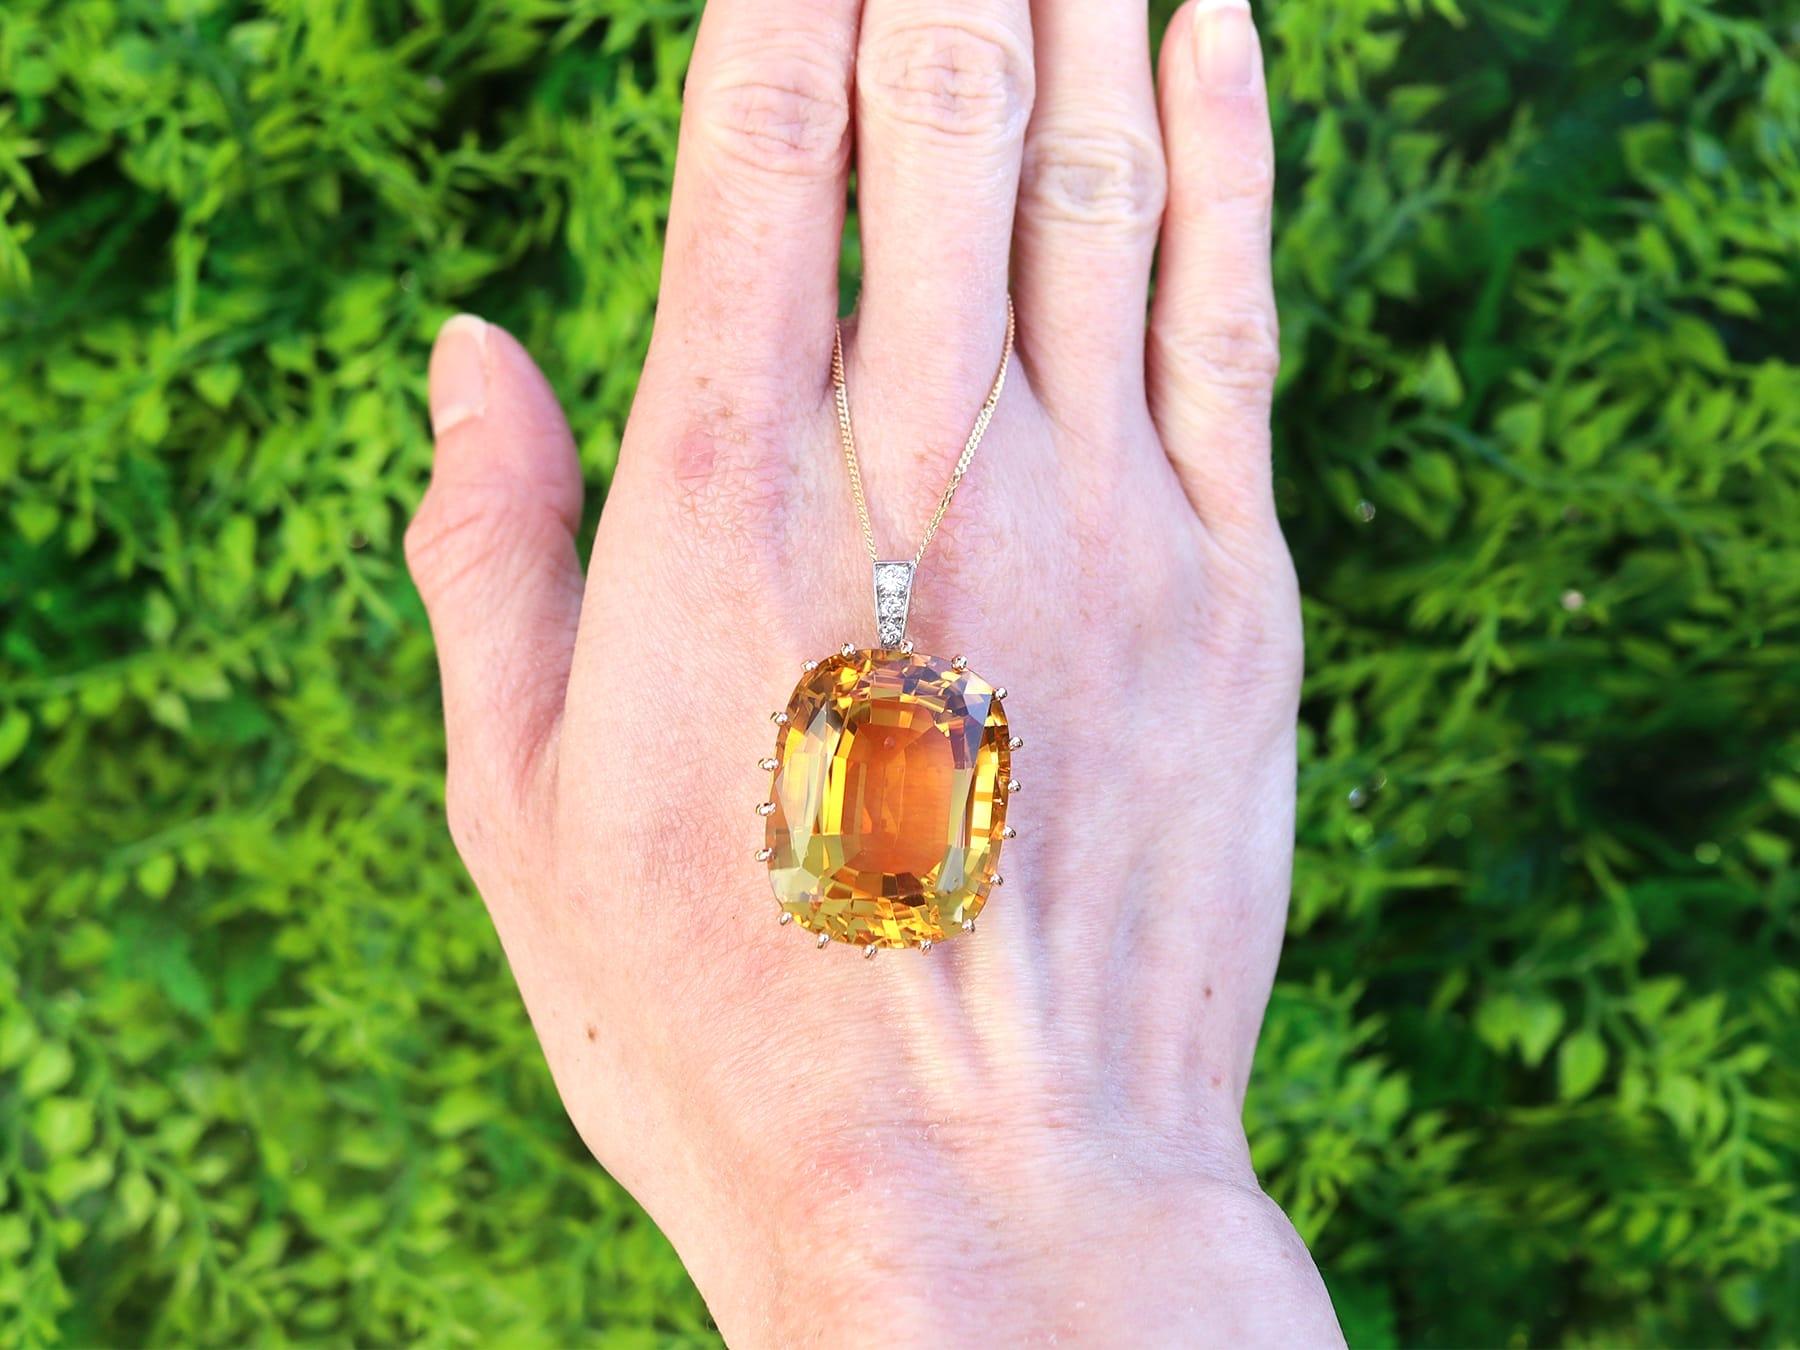 A stunning, fine and impressive vintage French 64.39 carat citrine and 18 karat yellow gold pendant; part of our diverse gemstone jewellery collections

This stunning, fine and impressive vintage pendant has been crafted in 18k yellow gold.

The